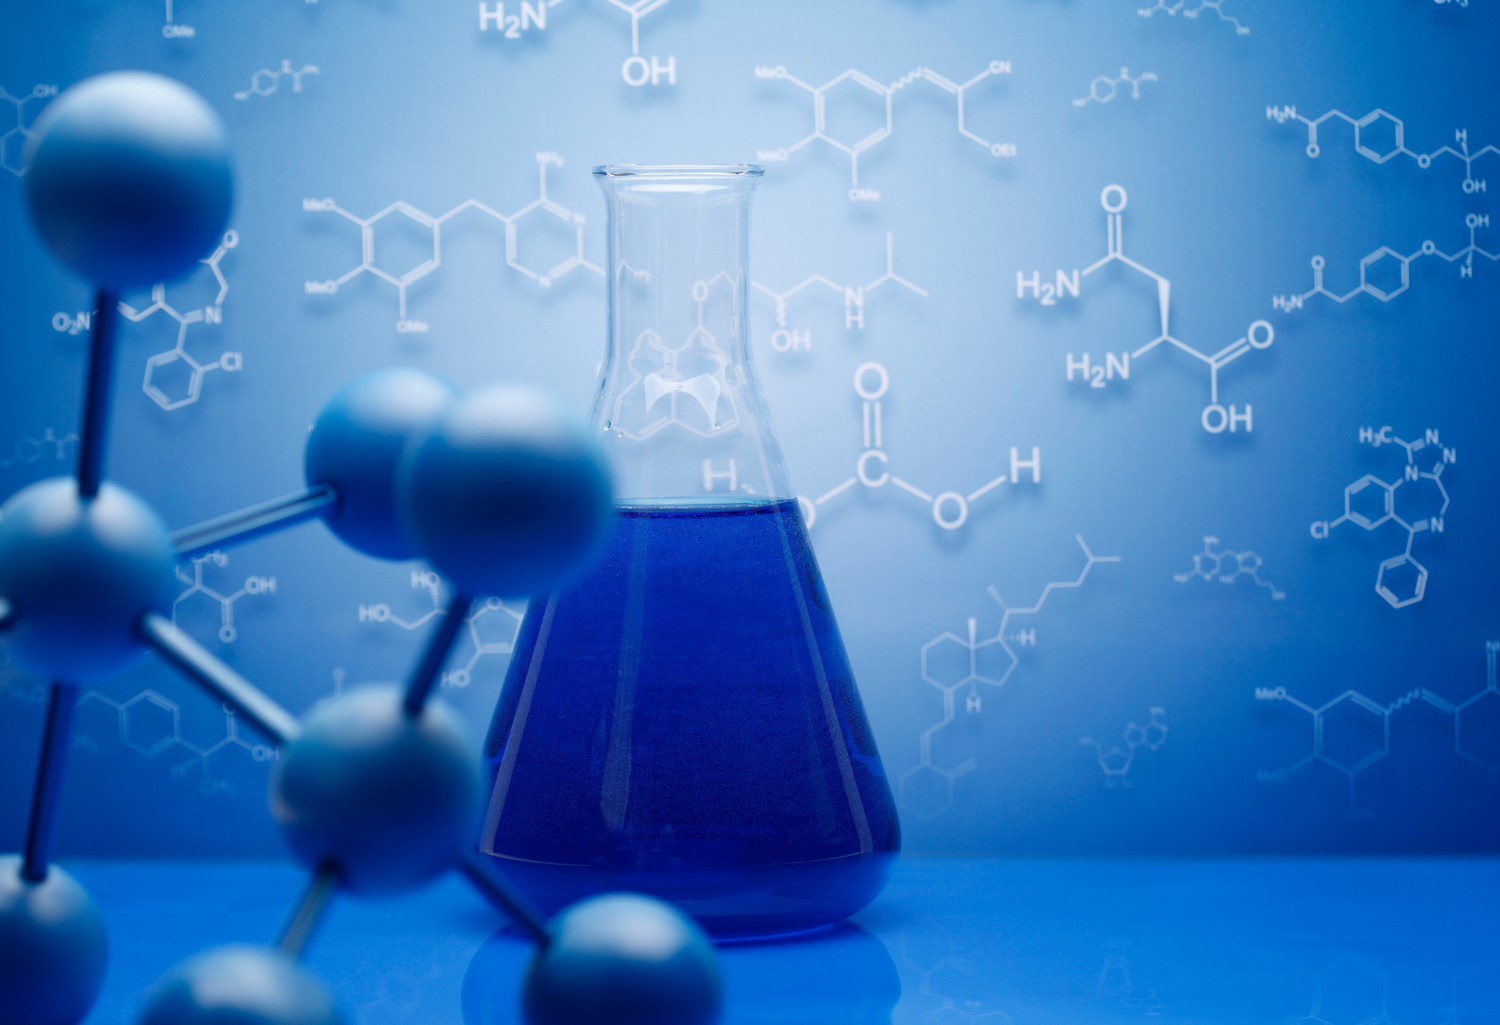 chemical glass full of blue chemicals infront of chemicals symbol wallpaper.